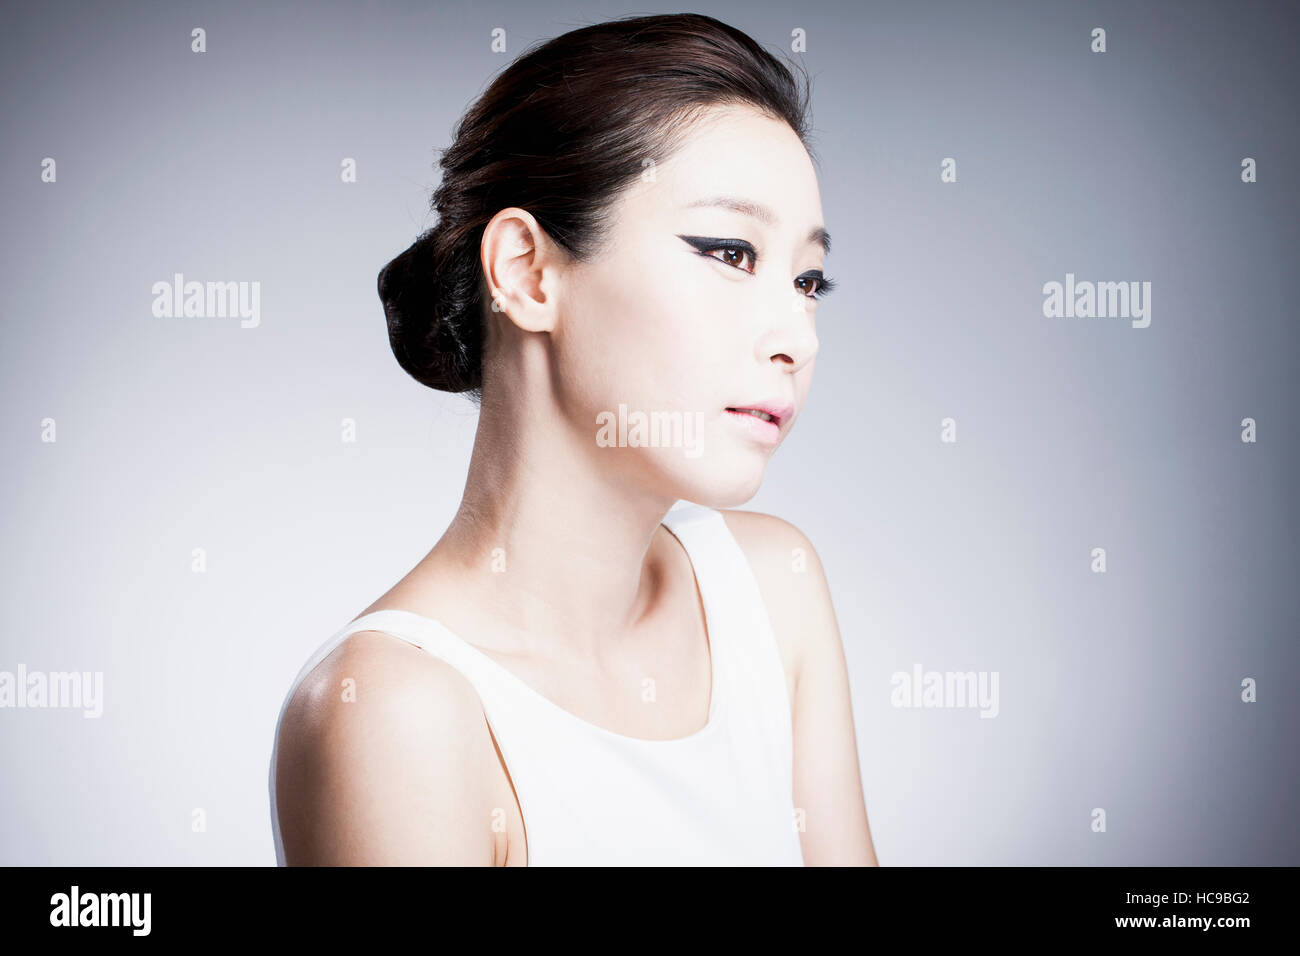 Side view of young Korean woman in black eyeliner Stock Photo